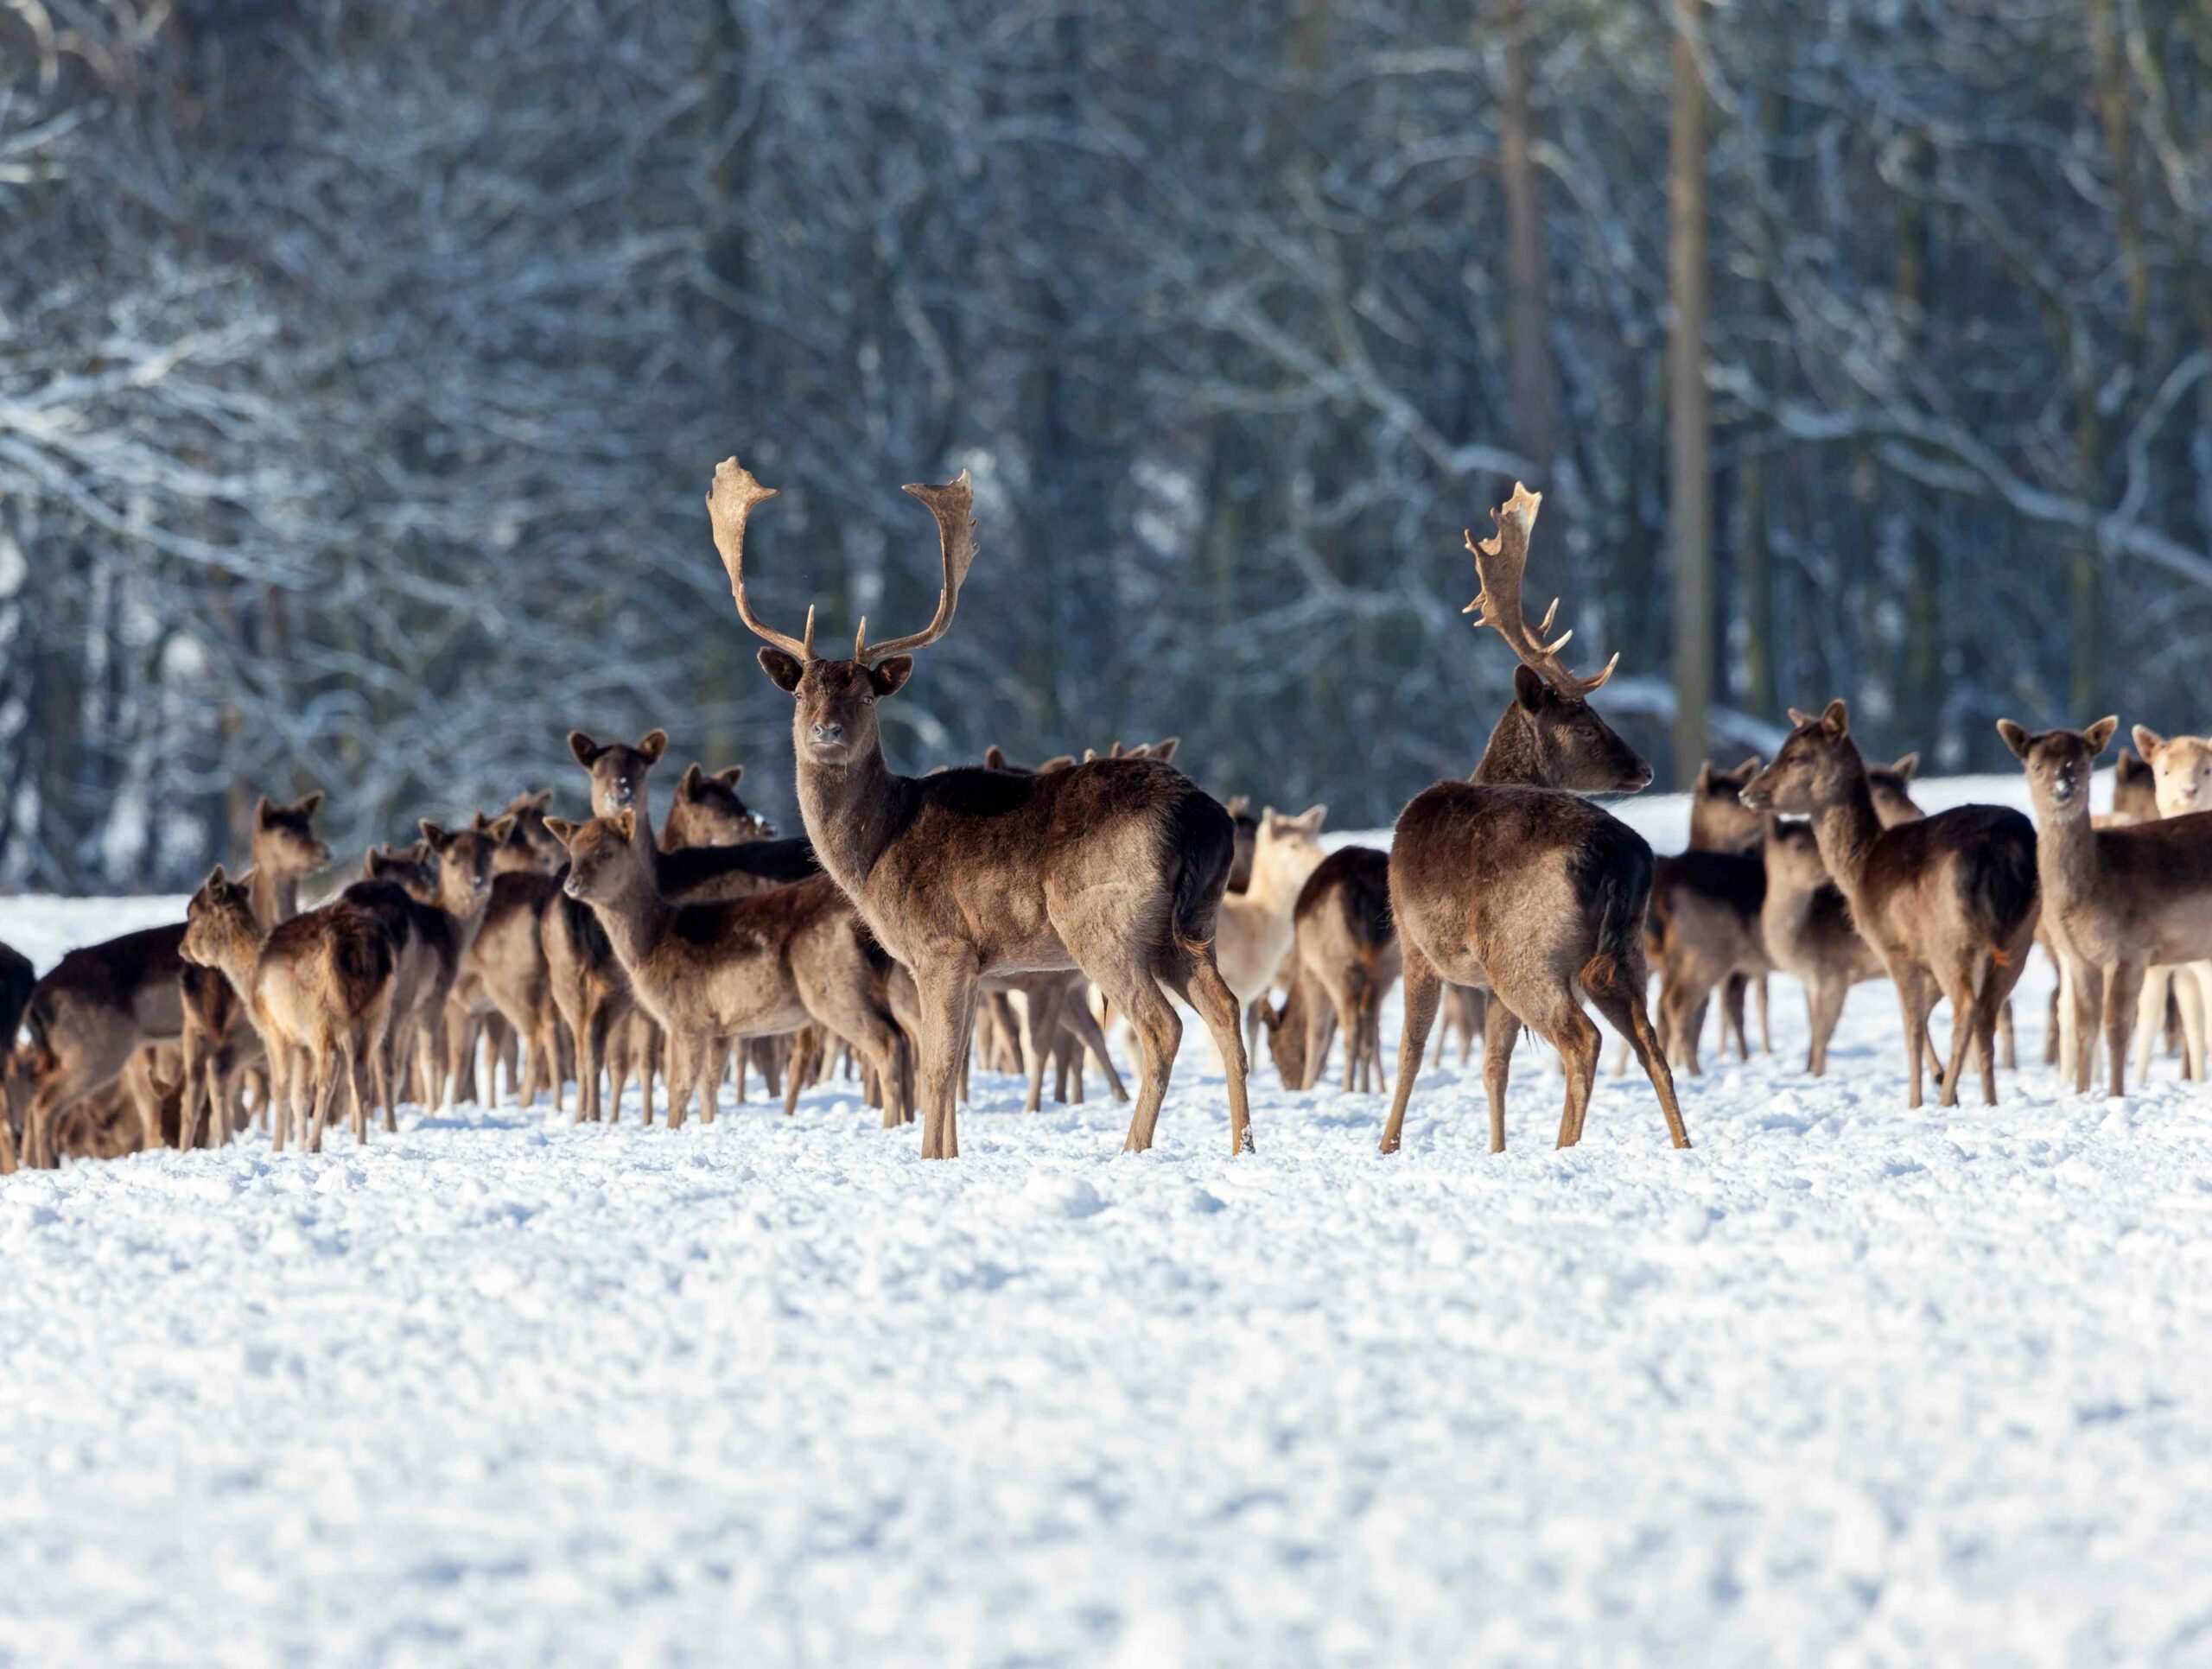 The picturesque Deer Park at County Durham’s iconic Raby Castle will be opening to families and friends on 1st January for the annual New Year’s Day charity walk